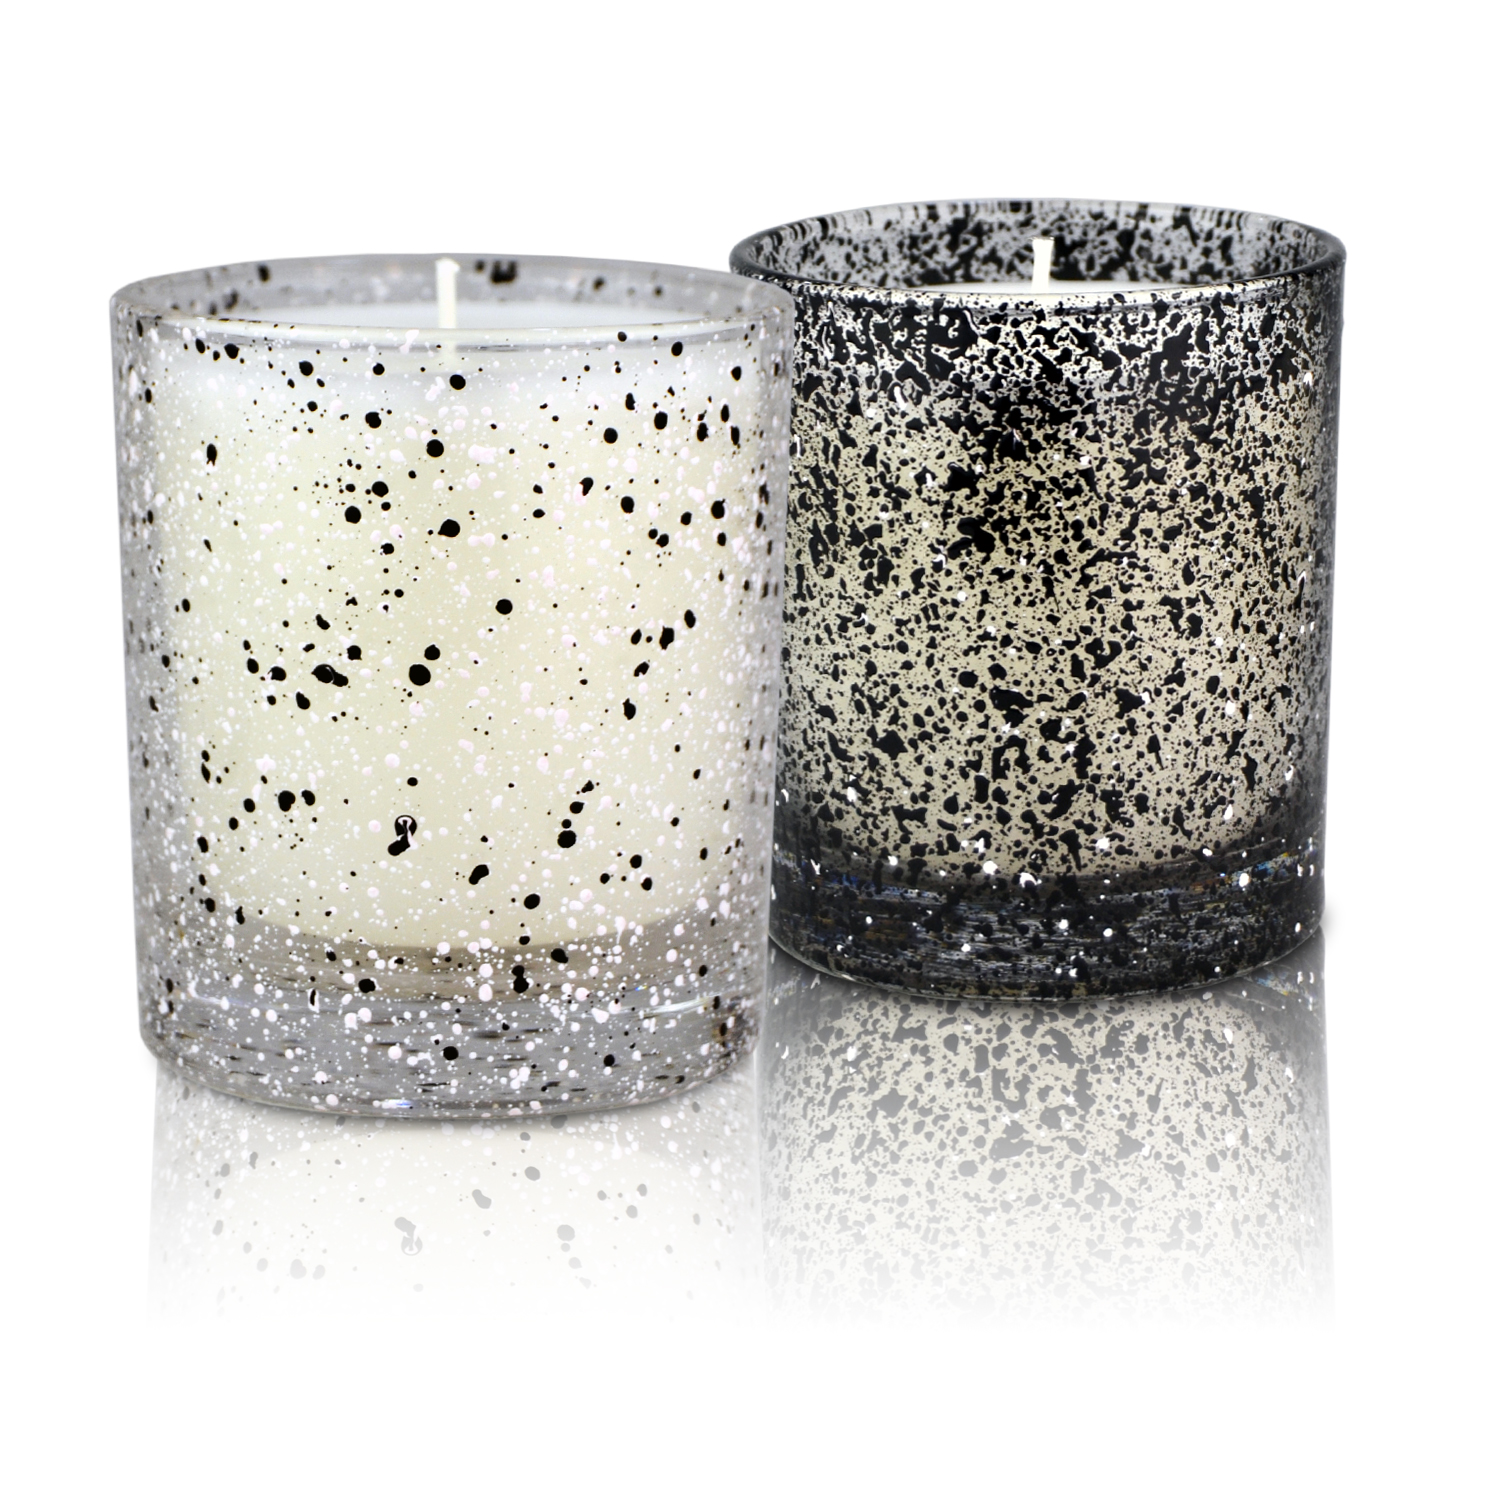 Scented glass jar candles with spot